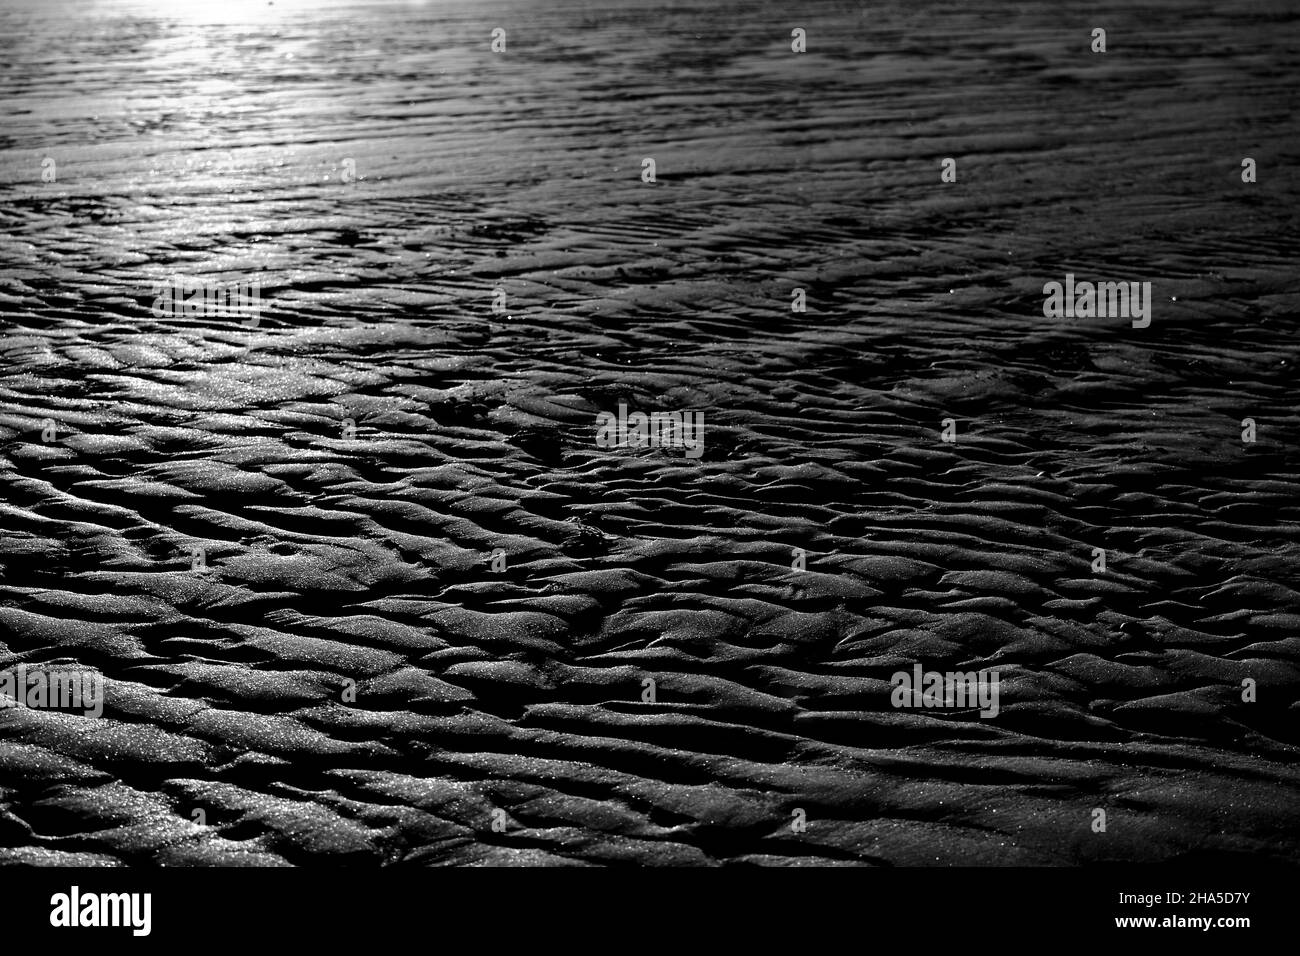 Stunning, naturally lit, B&W image showing naturally formed sand patterns on the North Yorkshire coast. Taken at South Gare, Redcar, Teesside, UK Stock Photo